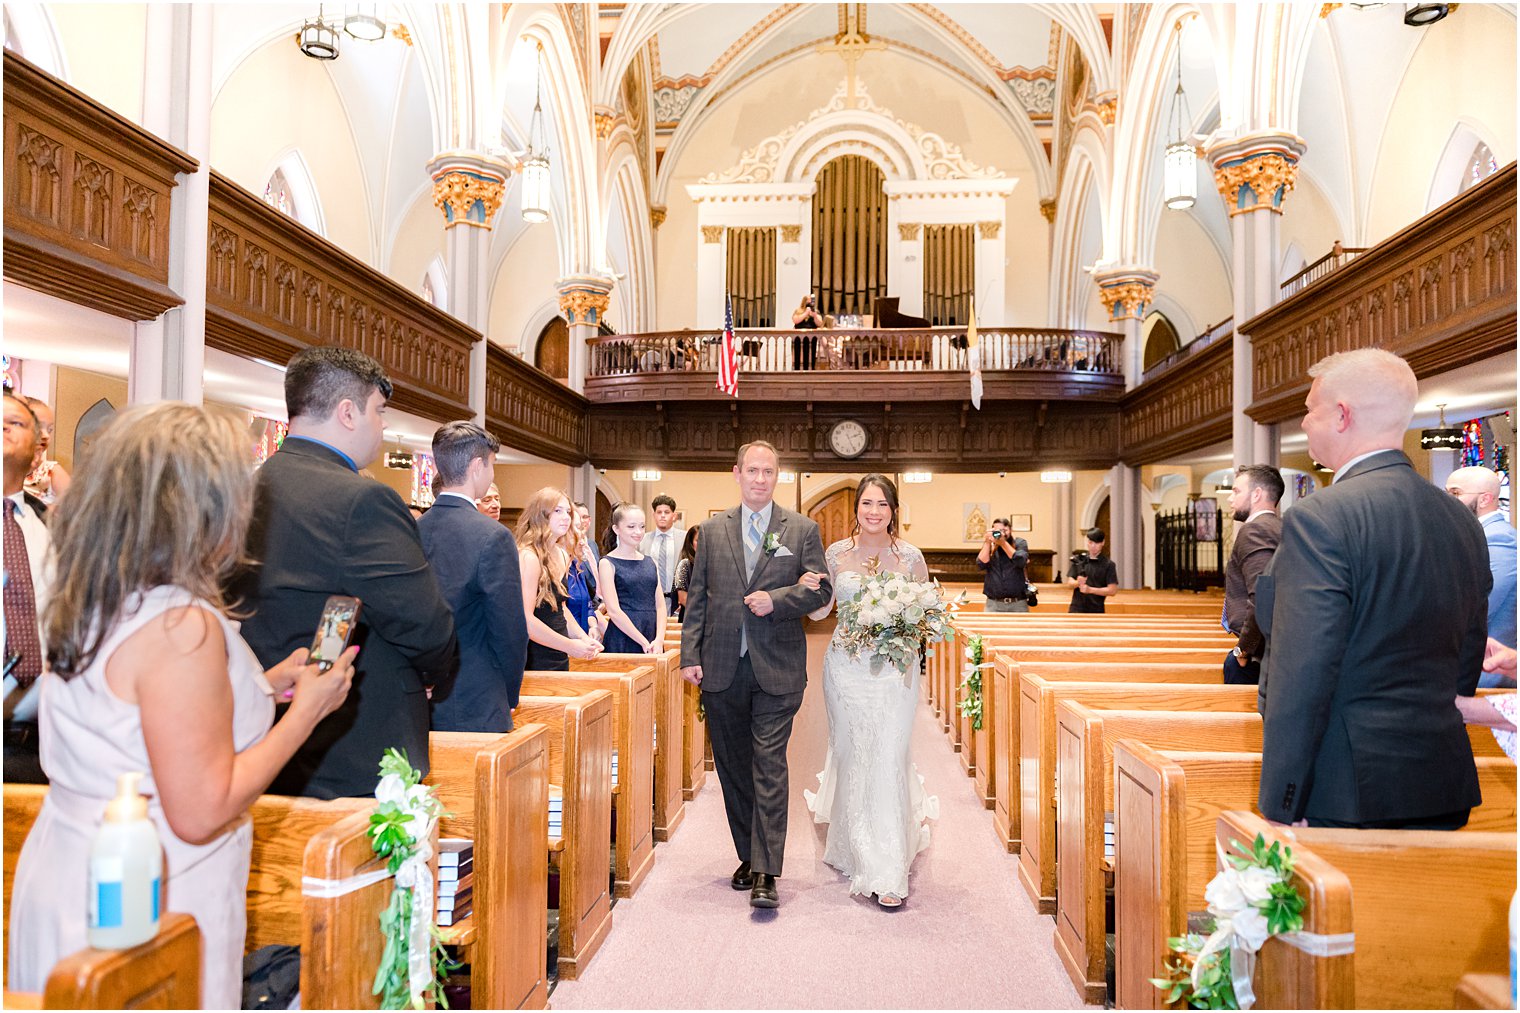 father walks bride down aisle at wedding ceremony at St. Peter's Catholic Church